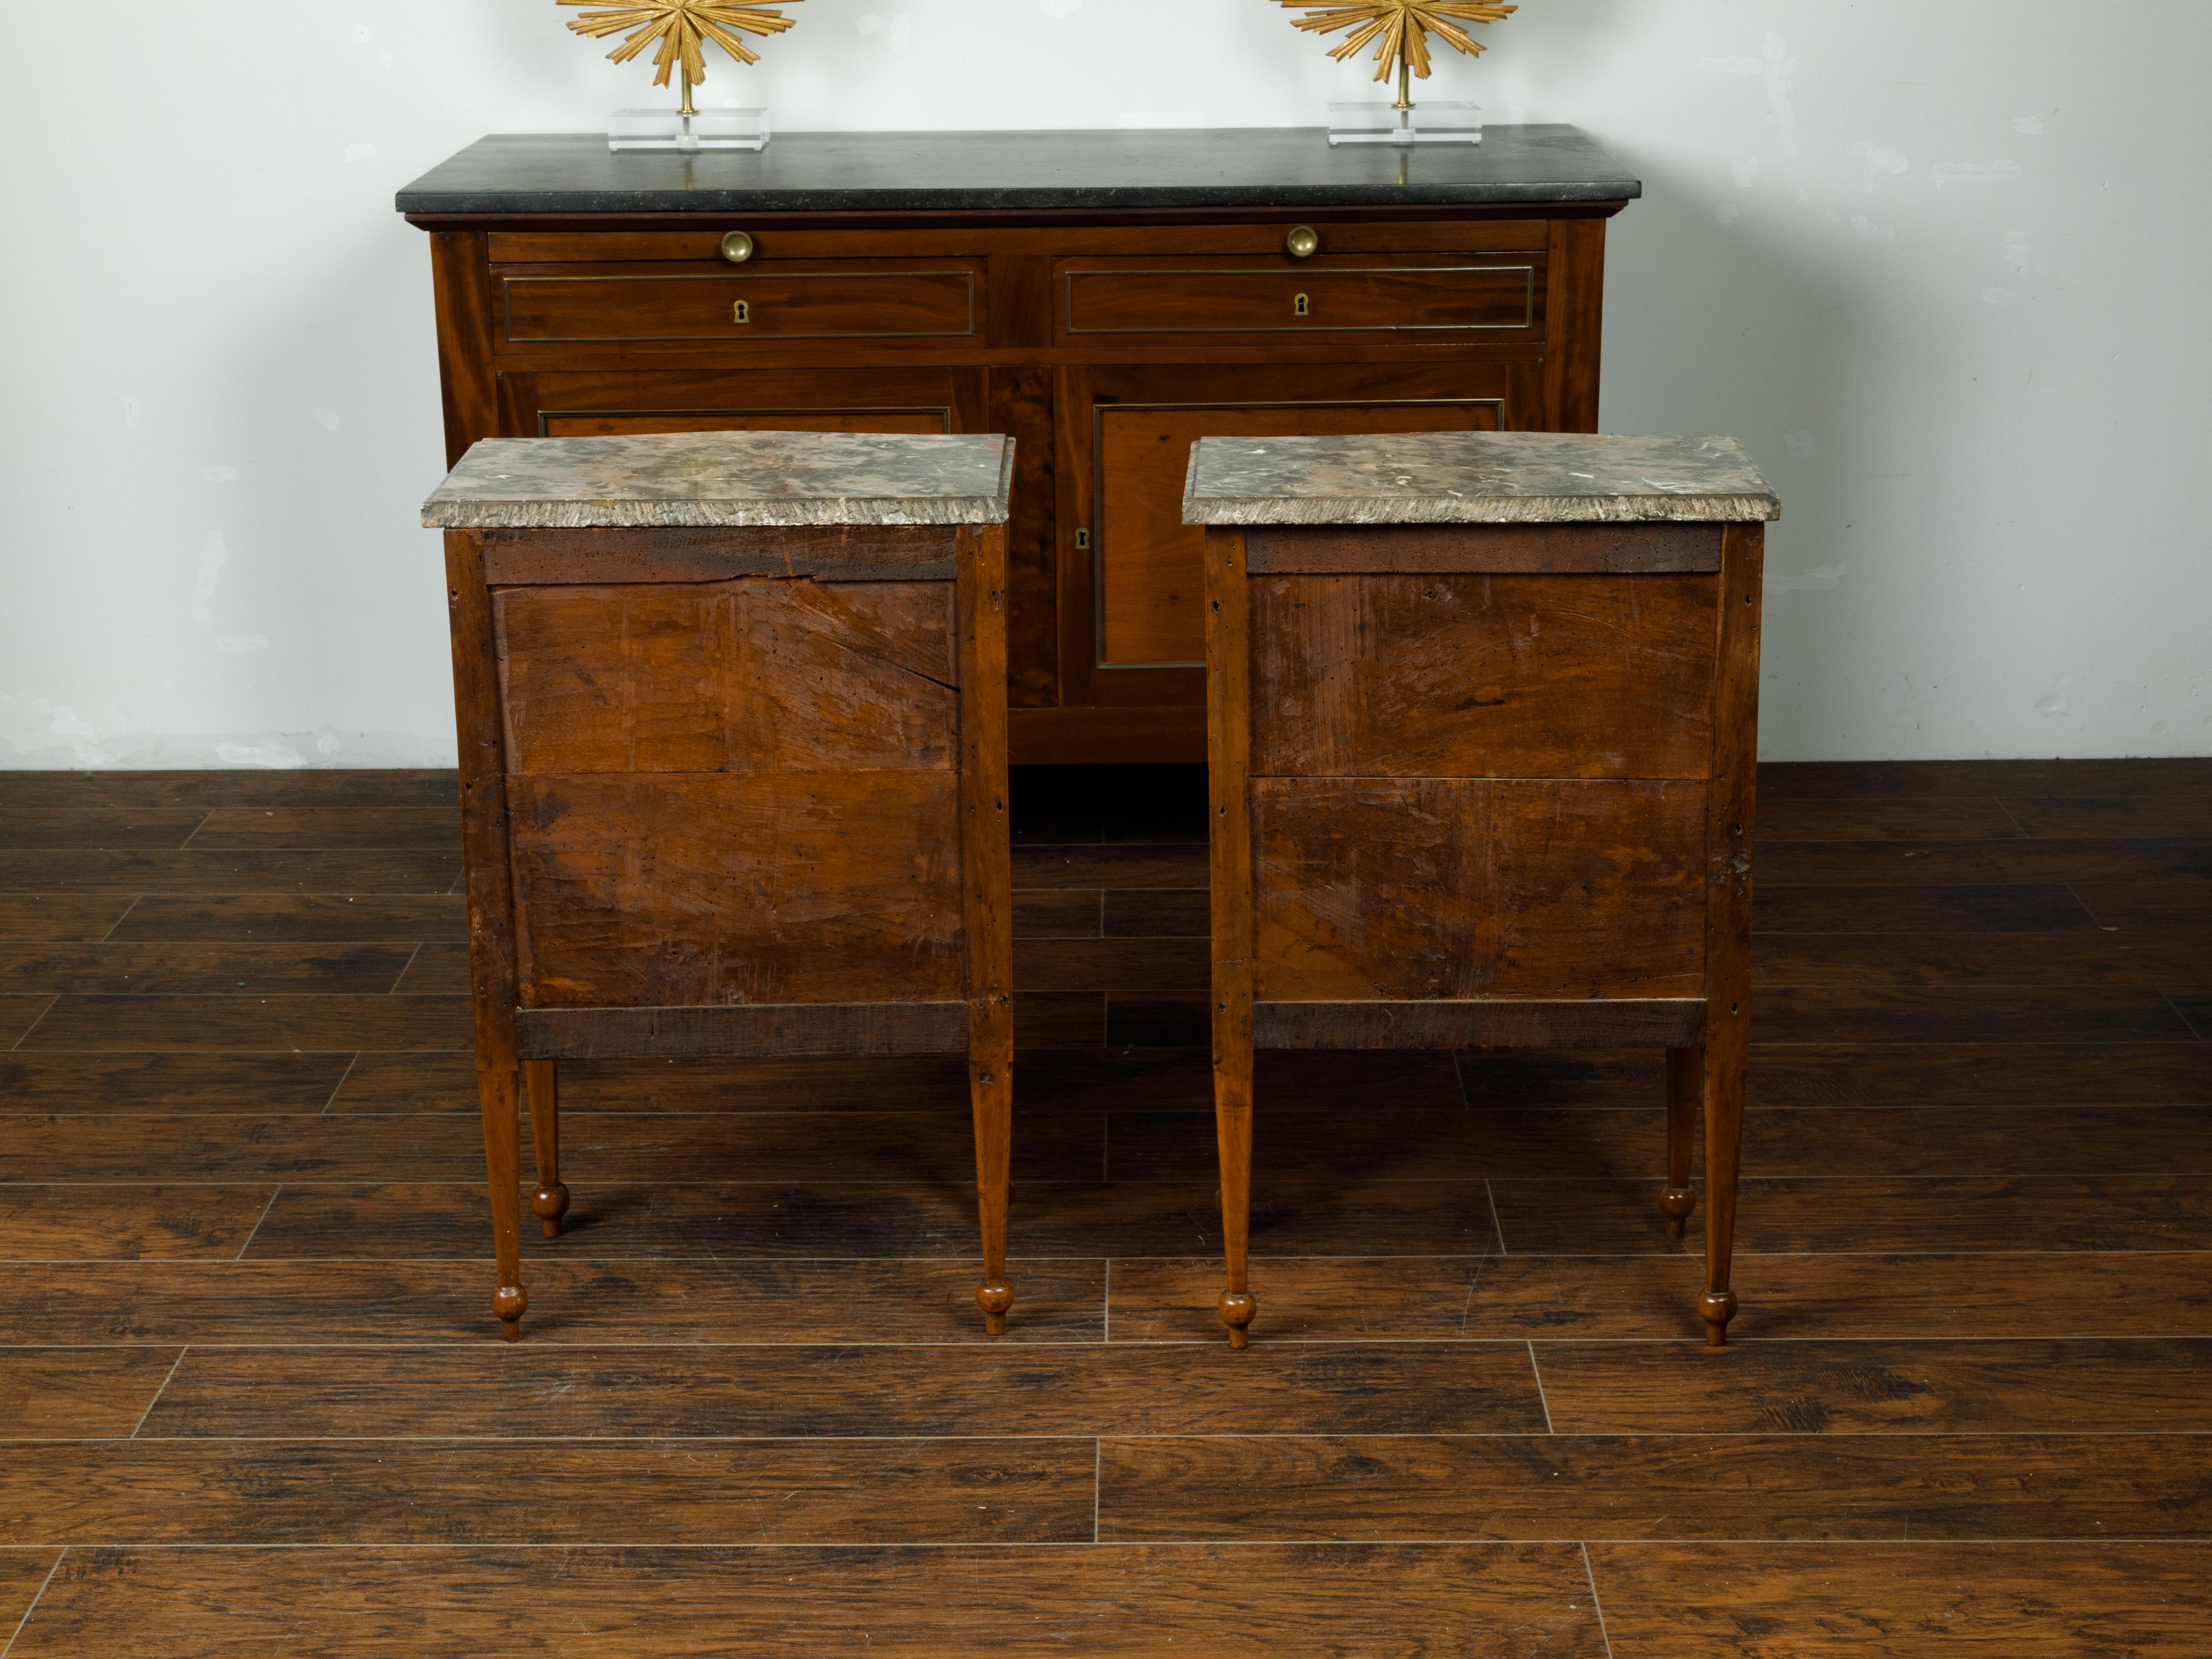 Pair of Italian 1840s Walnut Tables with Variegated Marble Top and Single Door For Sale 4